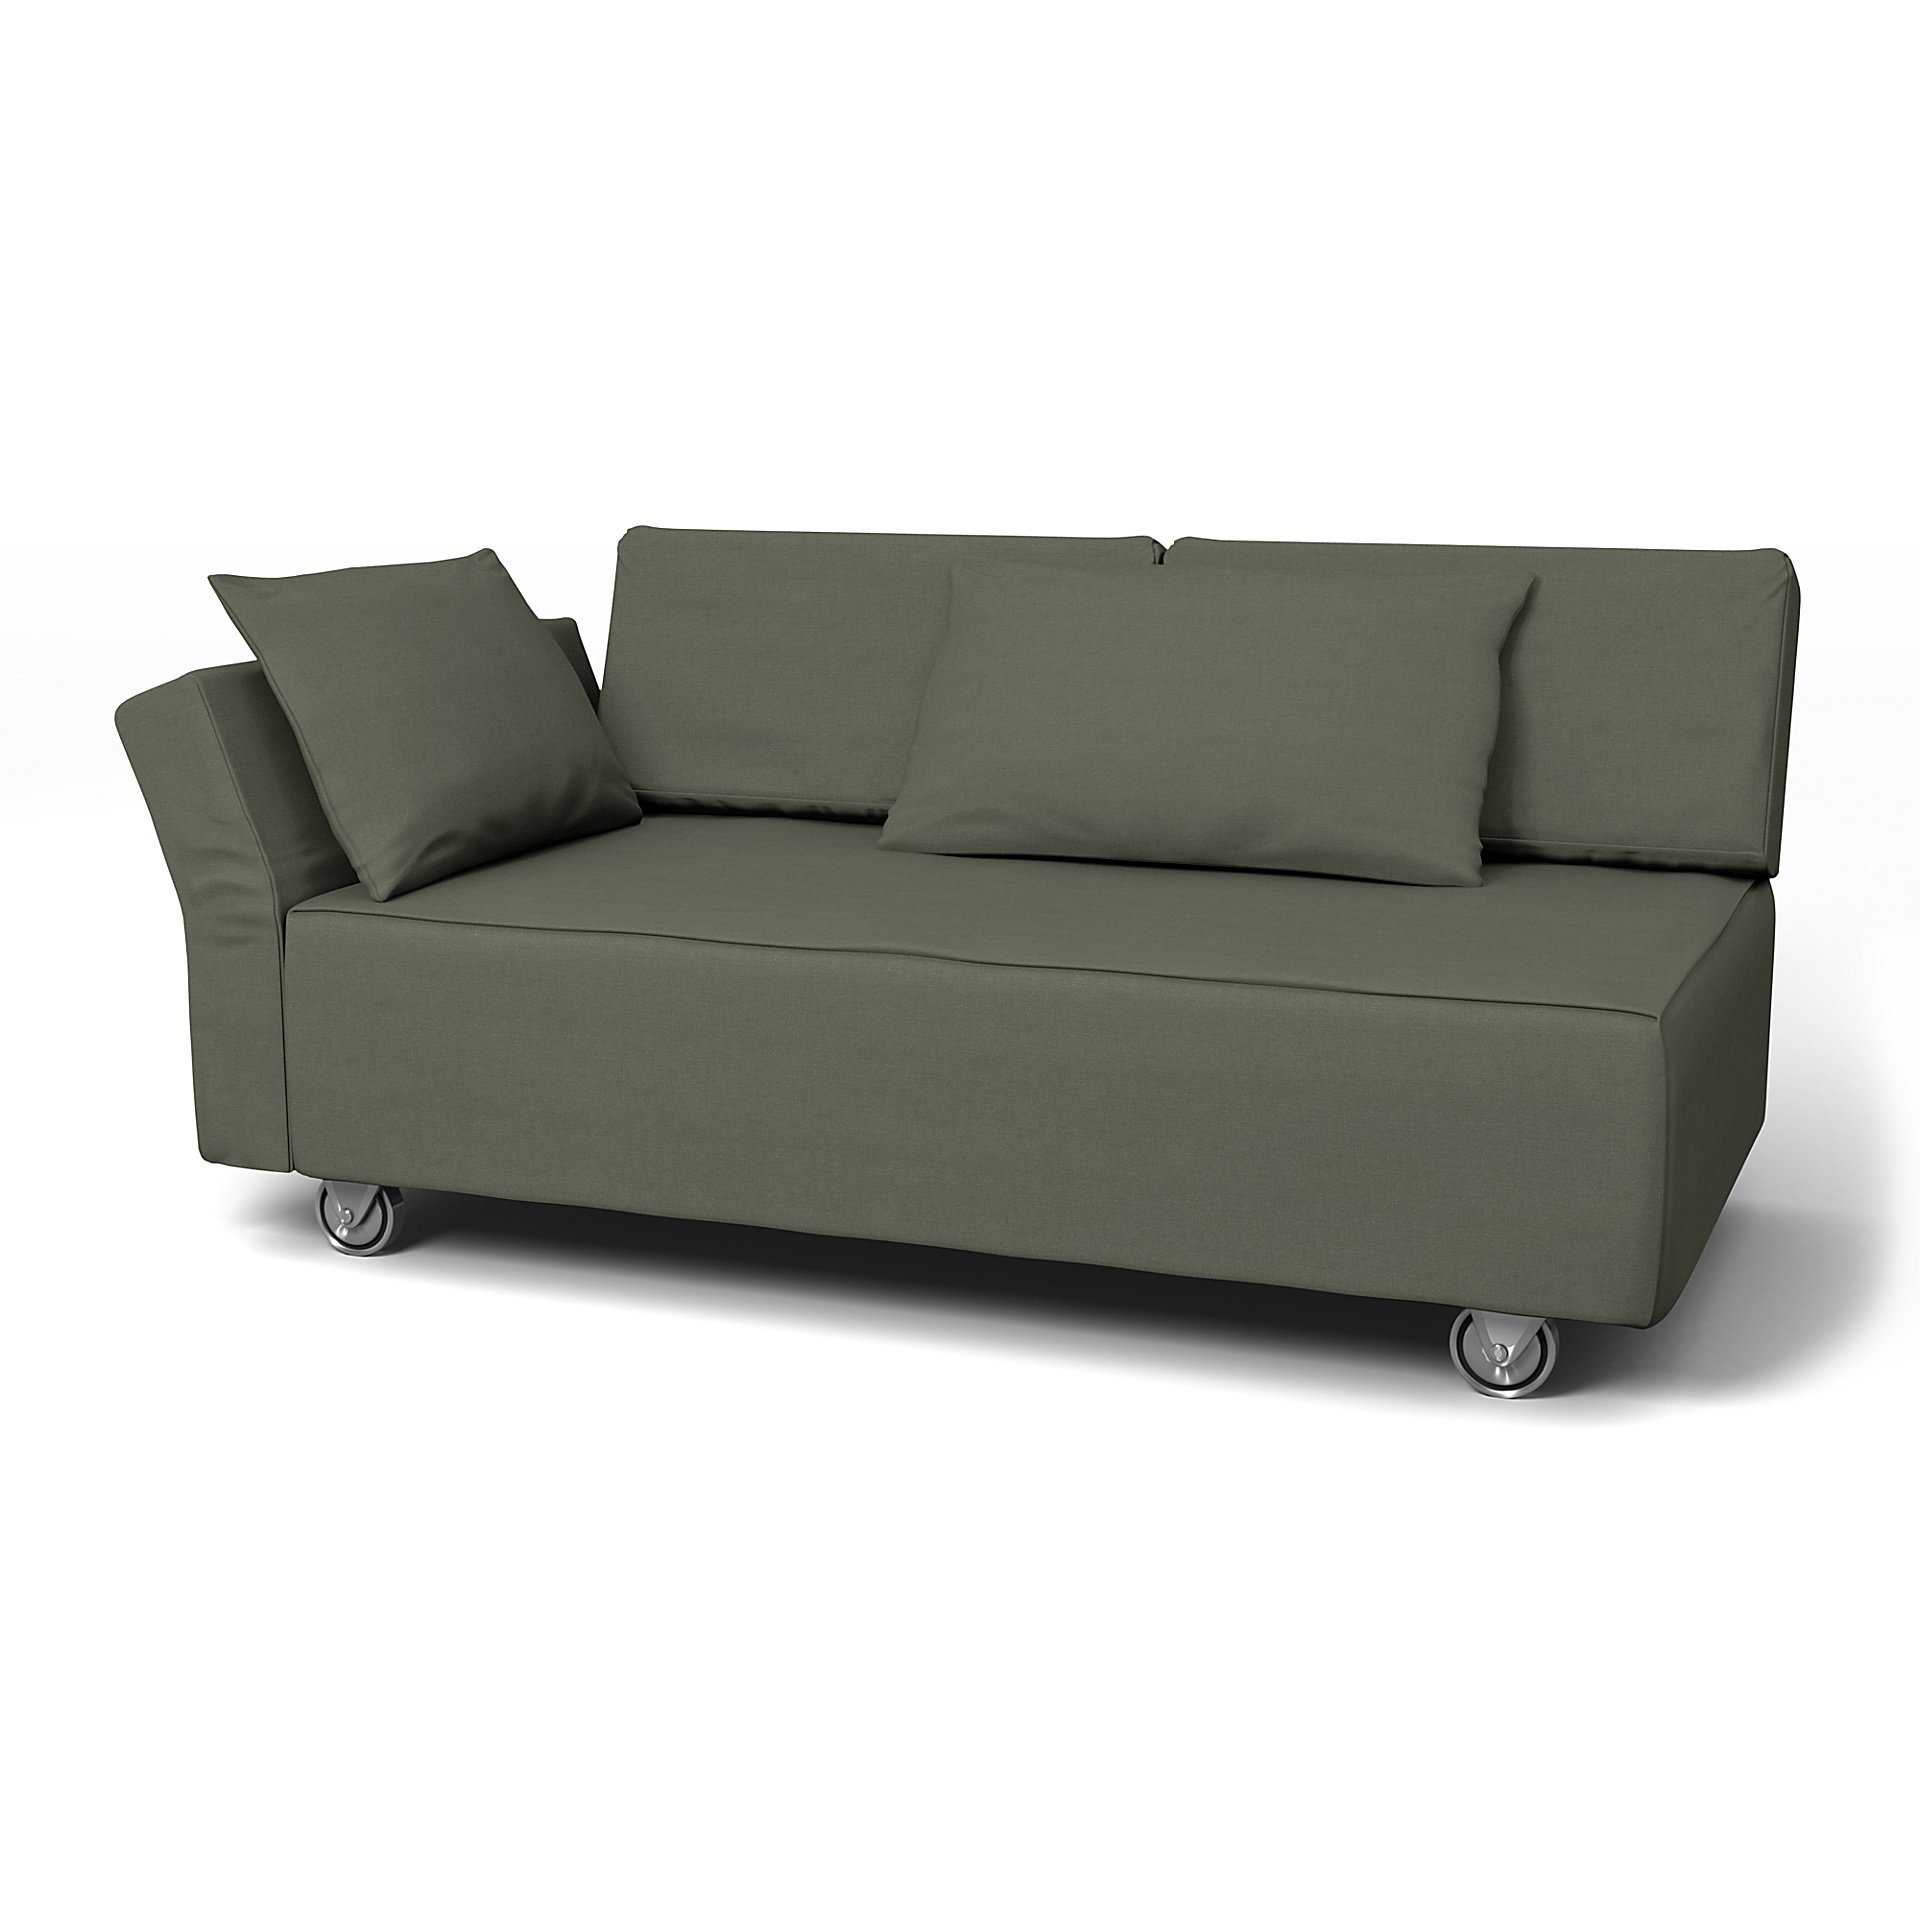 IKEA - Falsterbo 2 Seat Sofa with Left Arm Cover, Rosemary, Linen - Bemz